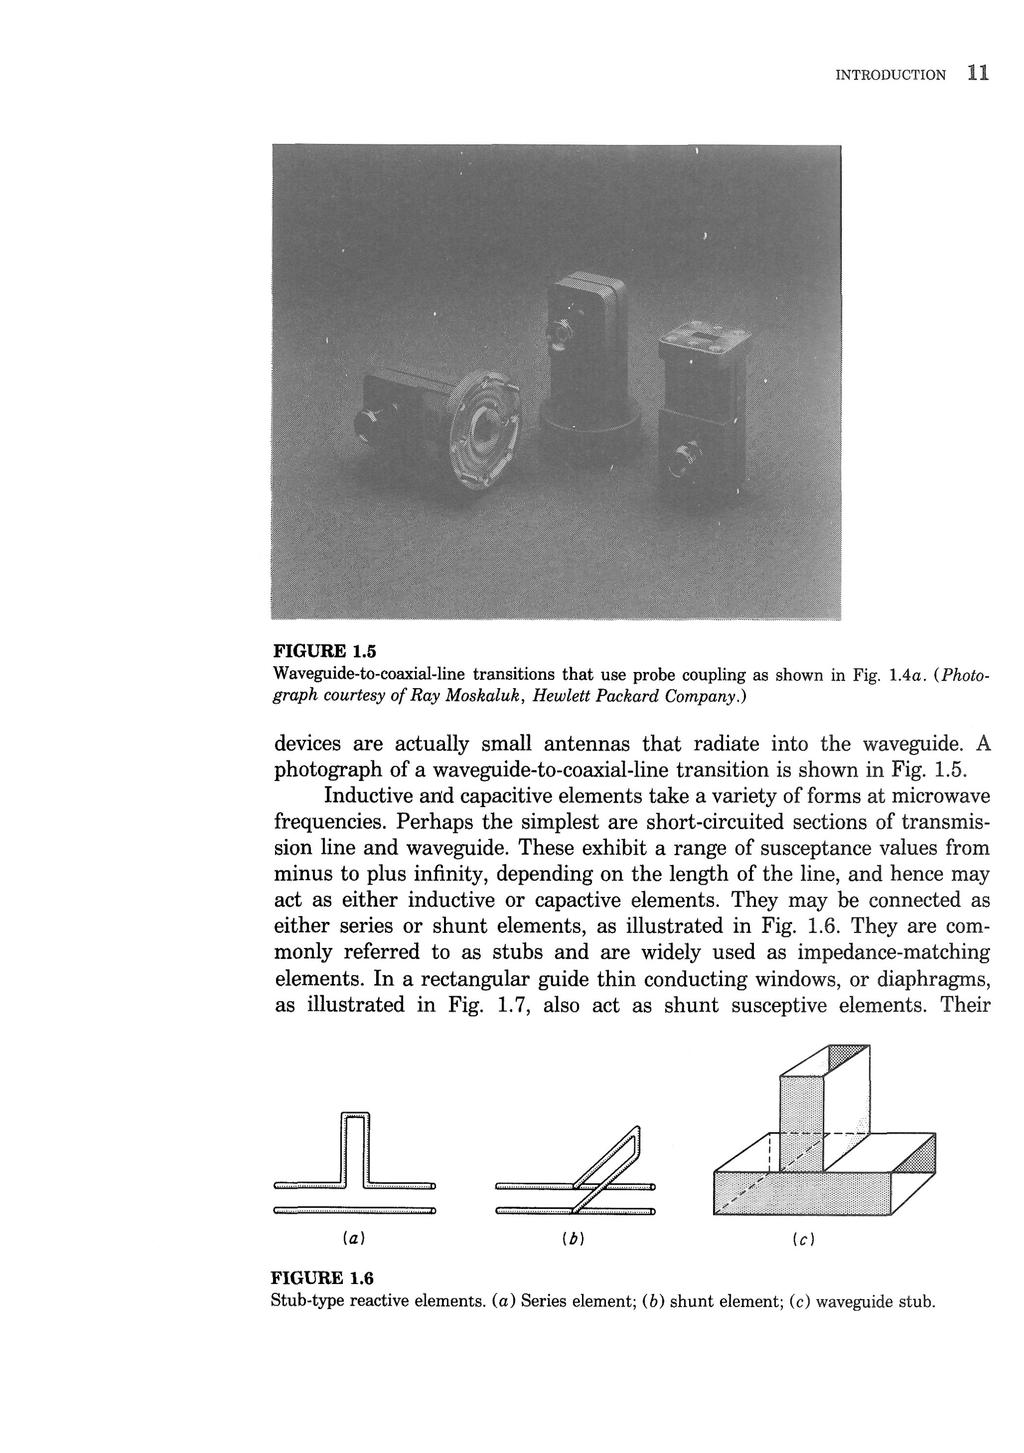 INTRODUCTION 11 FIGURE 1.5 Waveguide-to-coaxial-line transitions that use probe coupling as shown in Fig. 1.4a. (Photograph courtesy of Ray Moskaluk, Hewlett Packard Company.